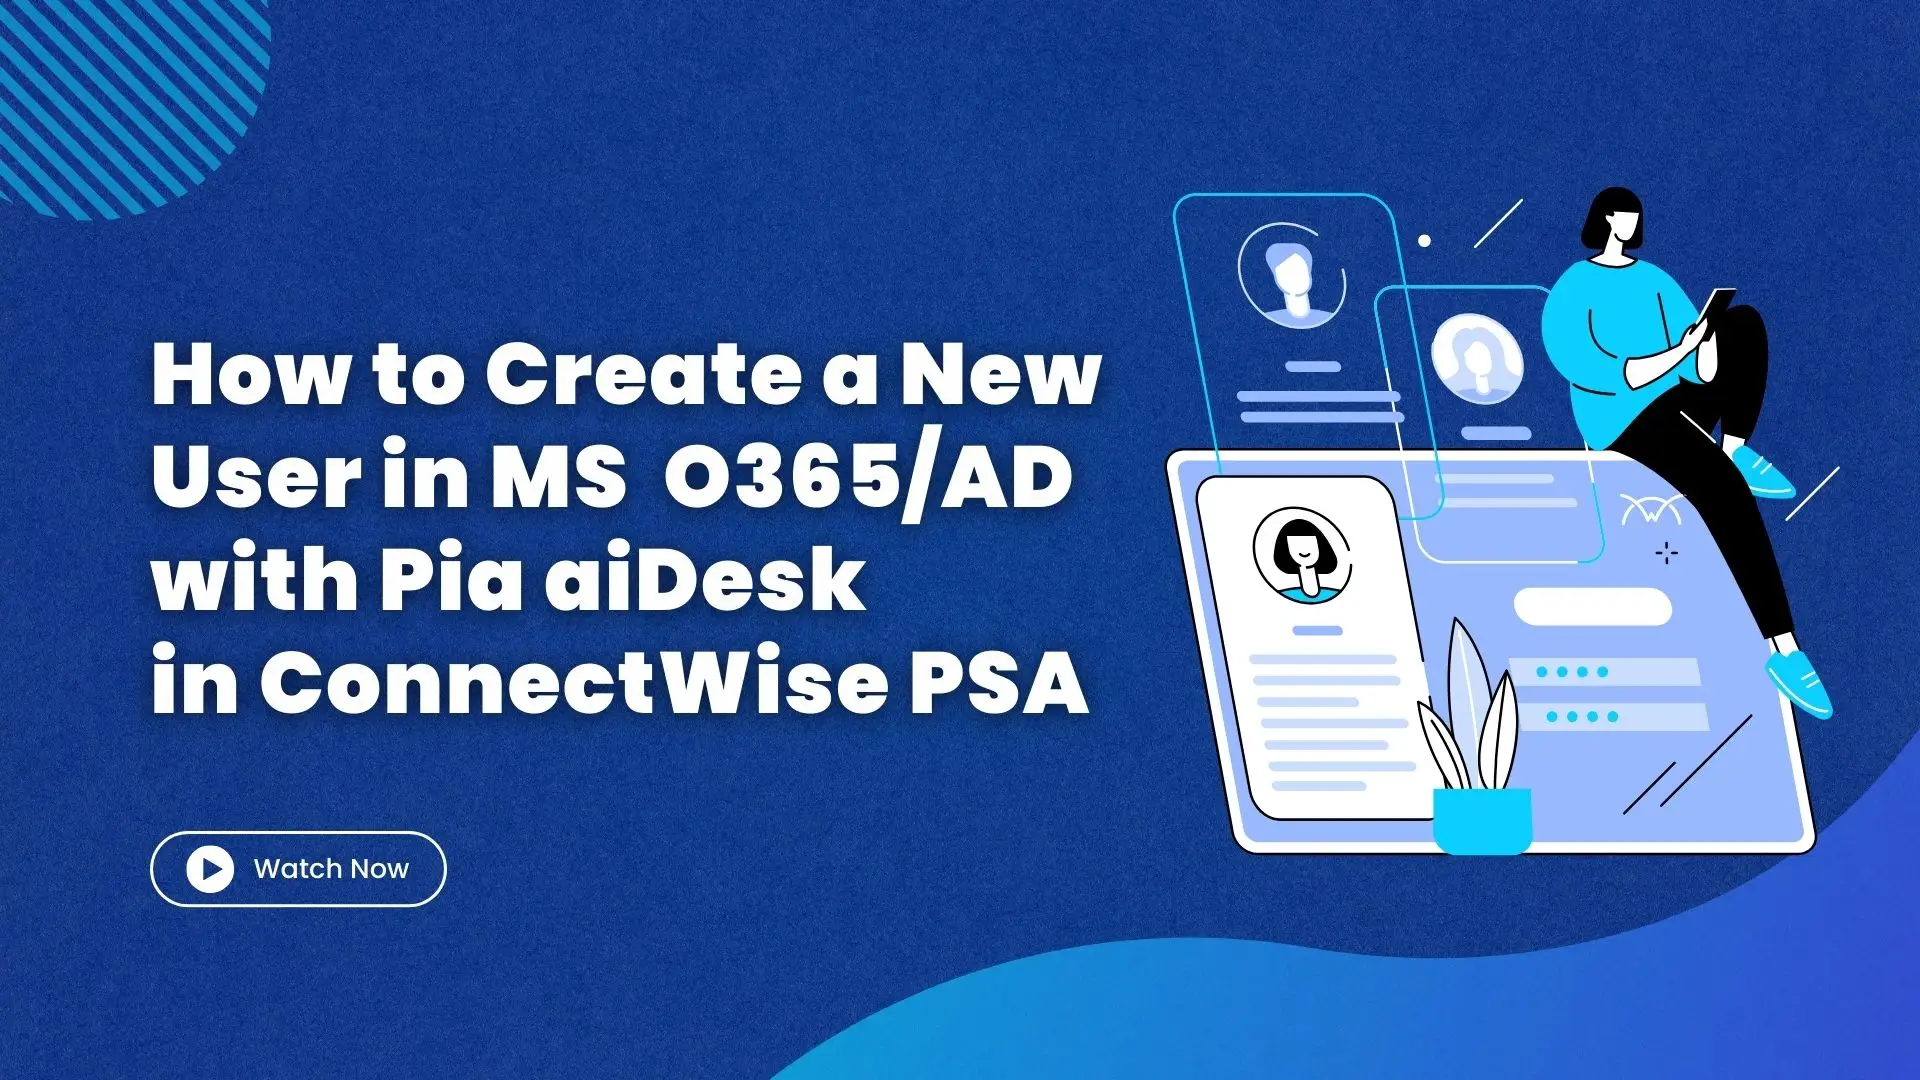 How to Create a New User in MS O365AD with Pia aiDesk in ConnectWise